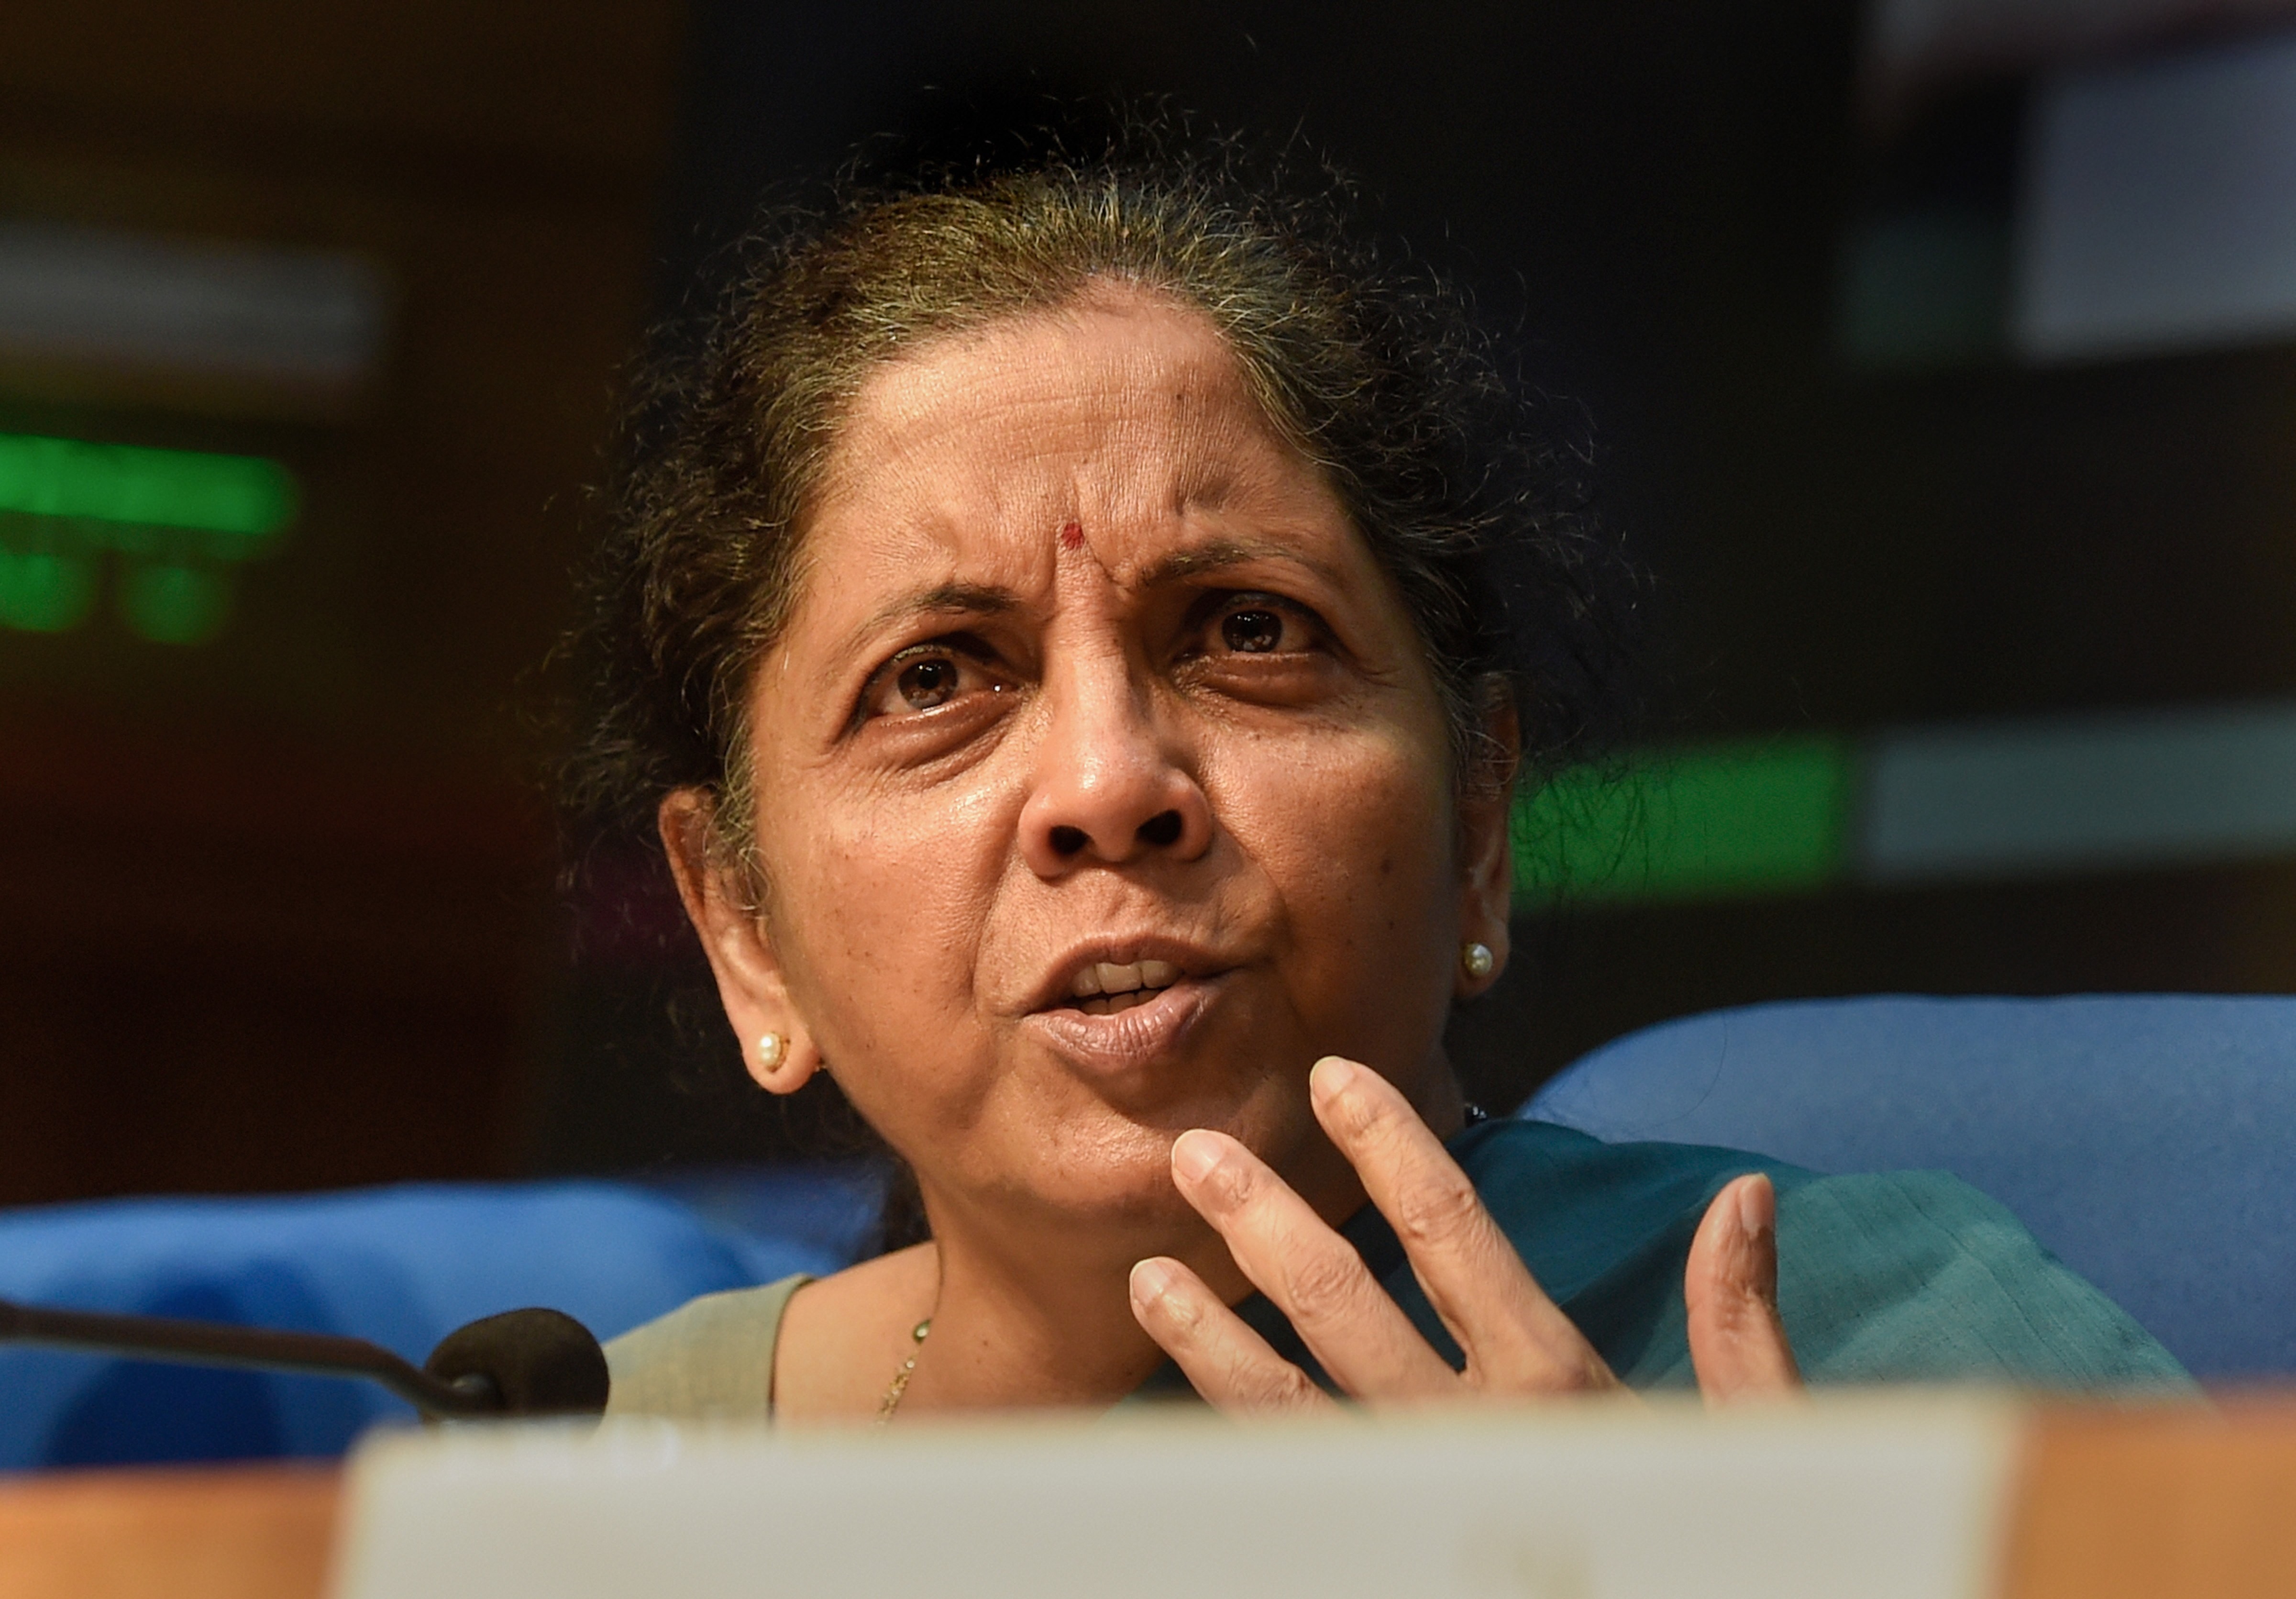 Union Finance Minister Nirmala Sitharaman addresses a press conference to announce the fifth and final tranche of economic stimulus package, at the National Media Centre in New Delhi, Sunday, May 17, 2020.